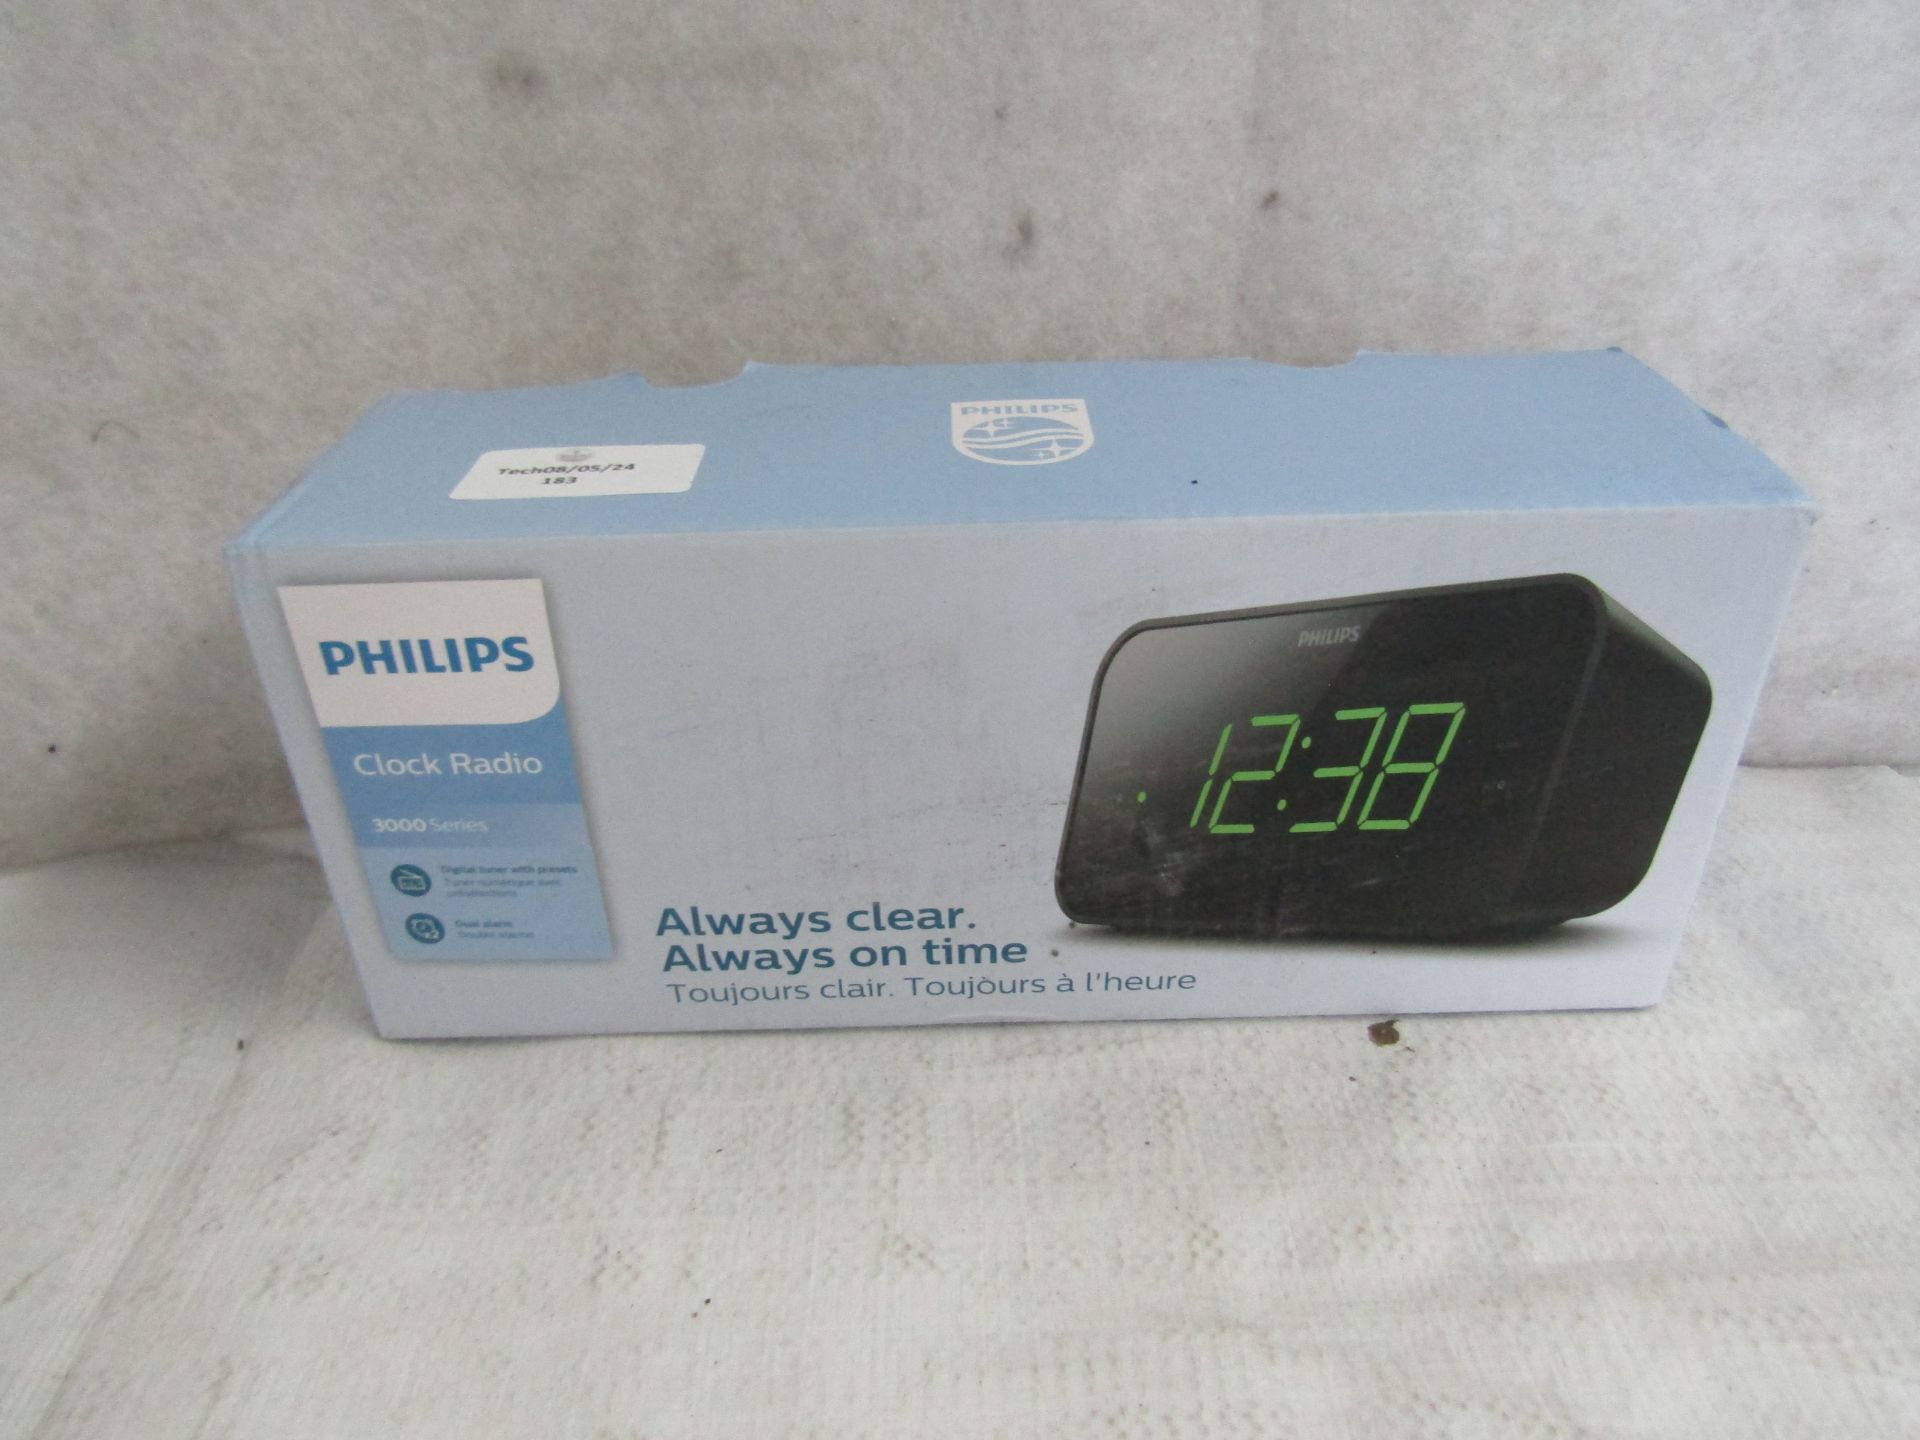 Philips Clock Radio 3000 Series - Unchecked & Boxed.